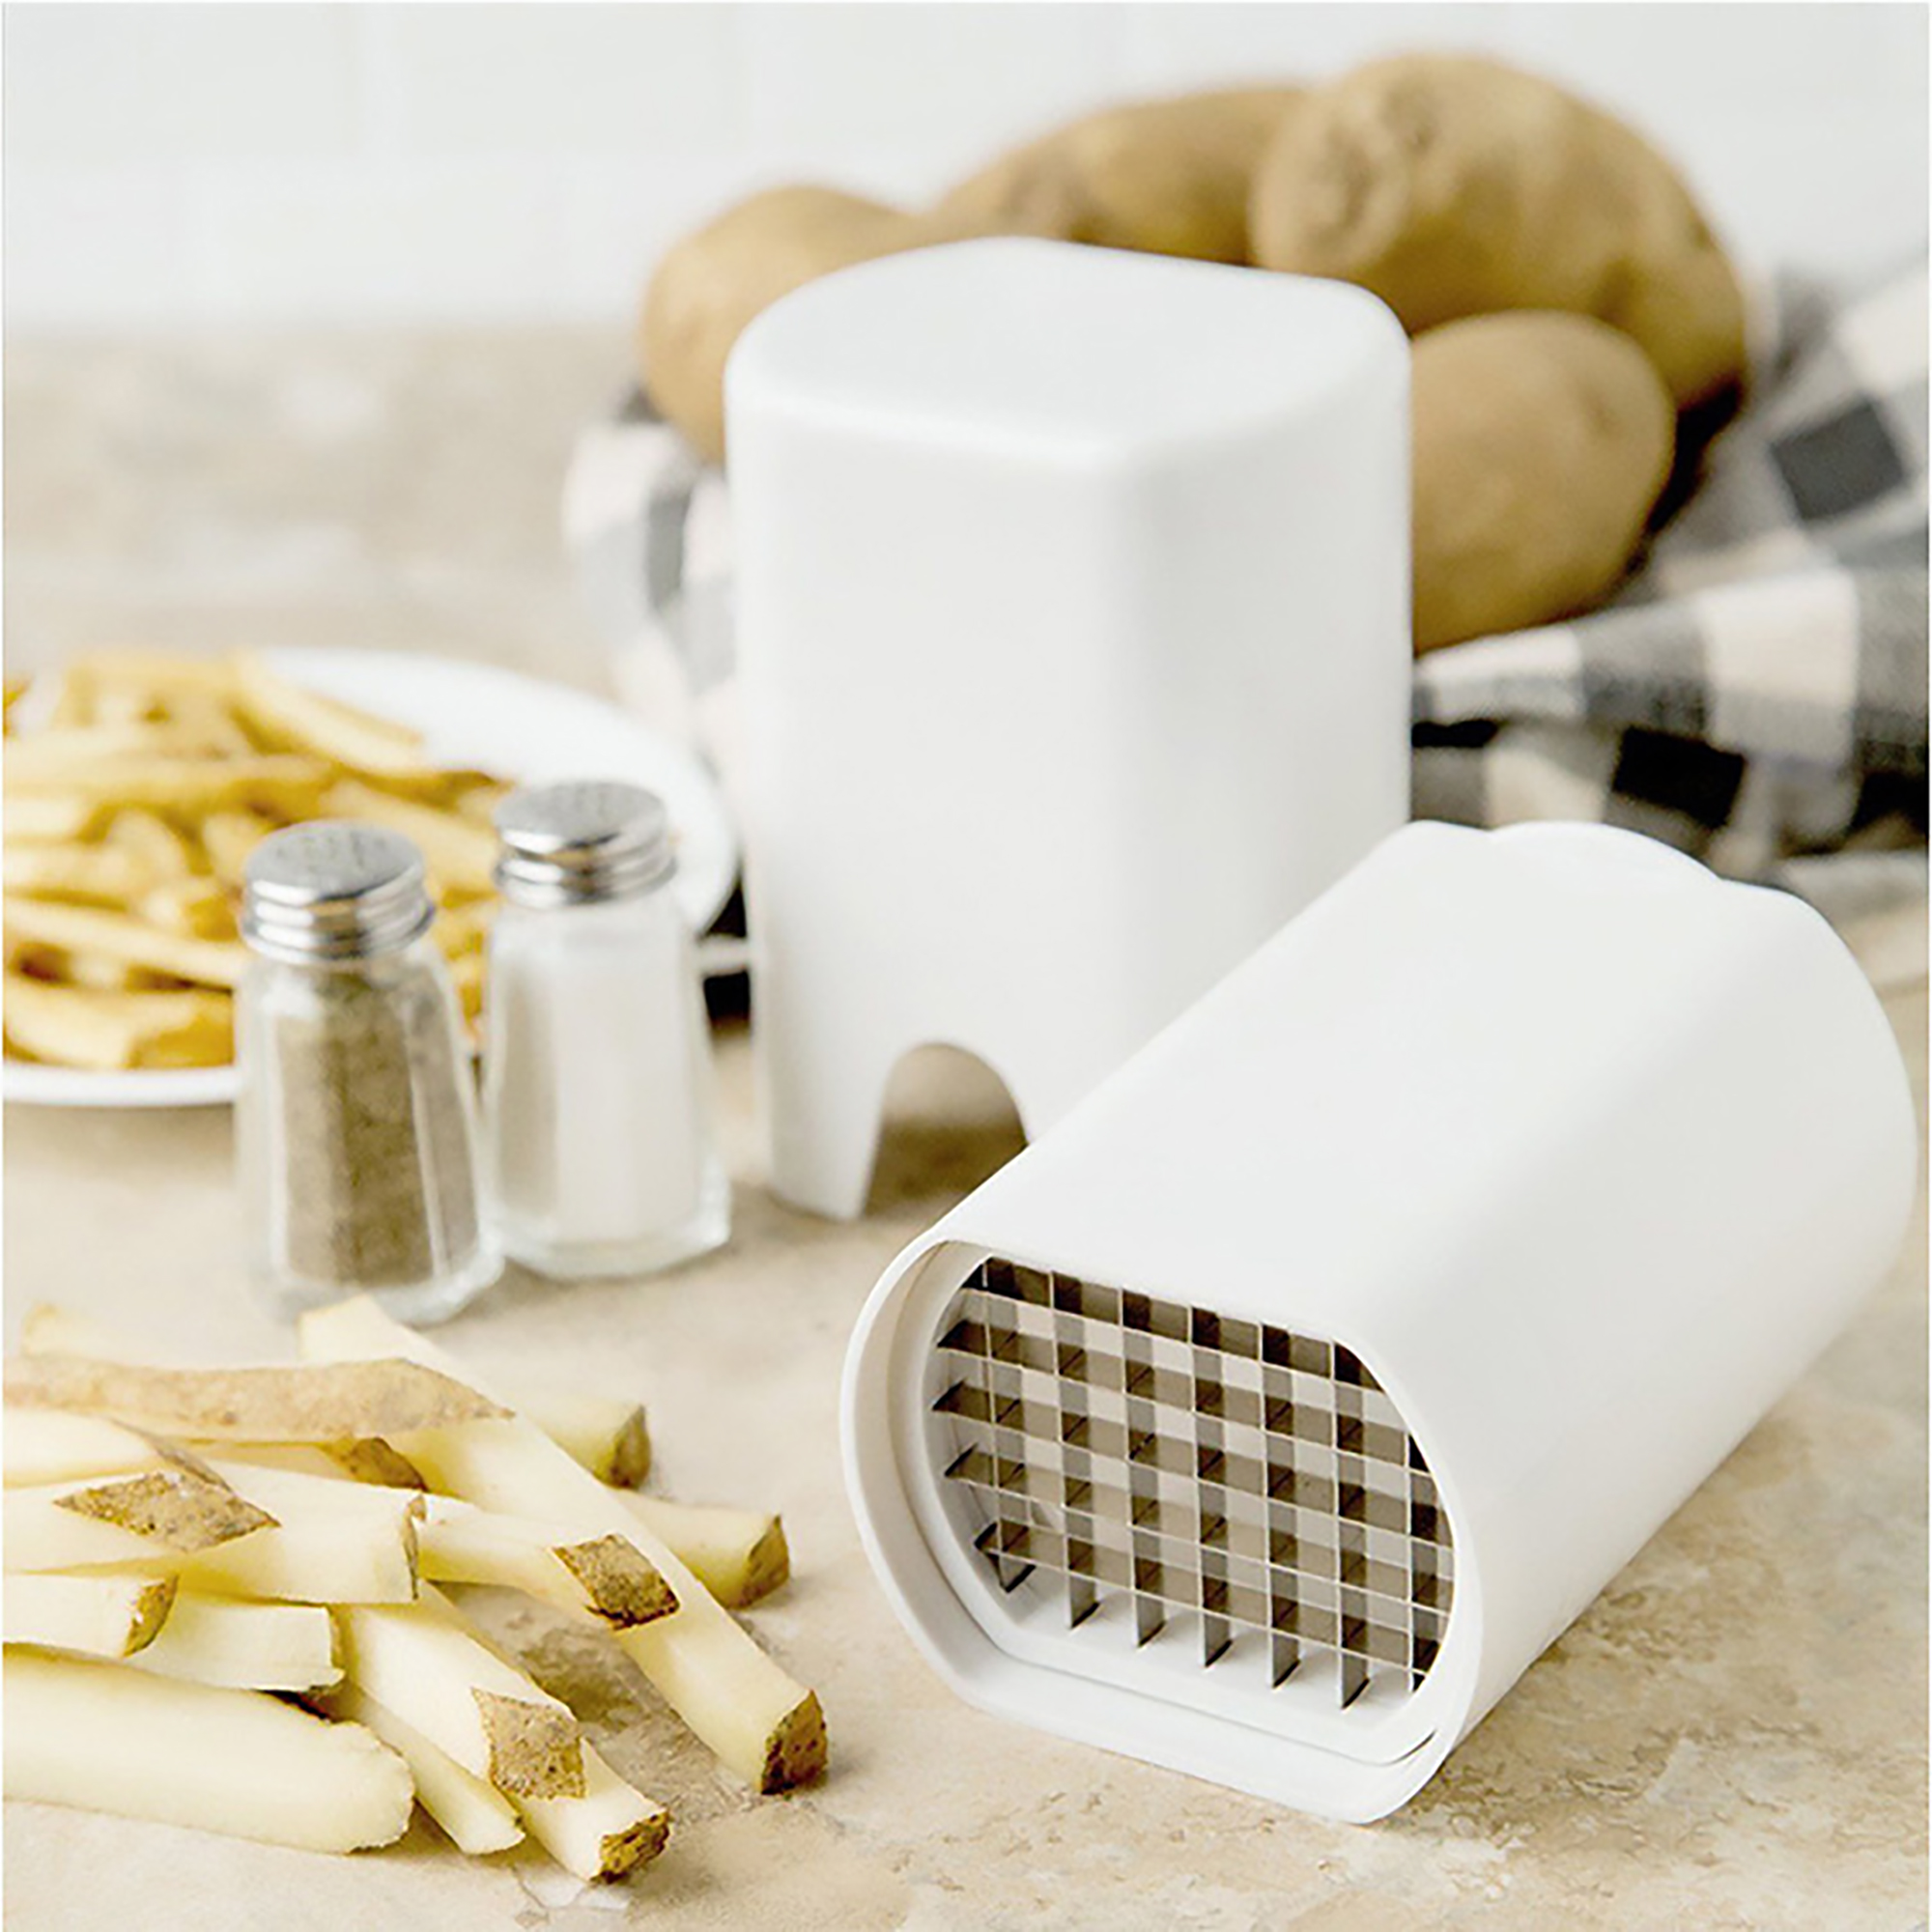 SeekFunning French Fry Cutter,Natural Cut Rapid Slicer Vegetable Dicer  Potato Slice Tool Easy to Clean